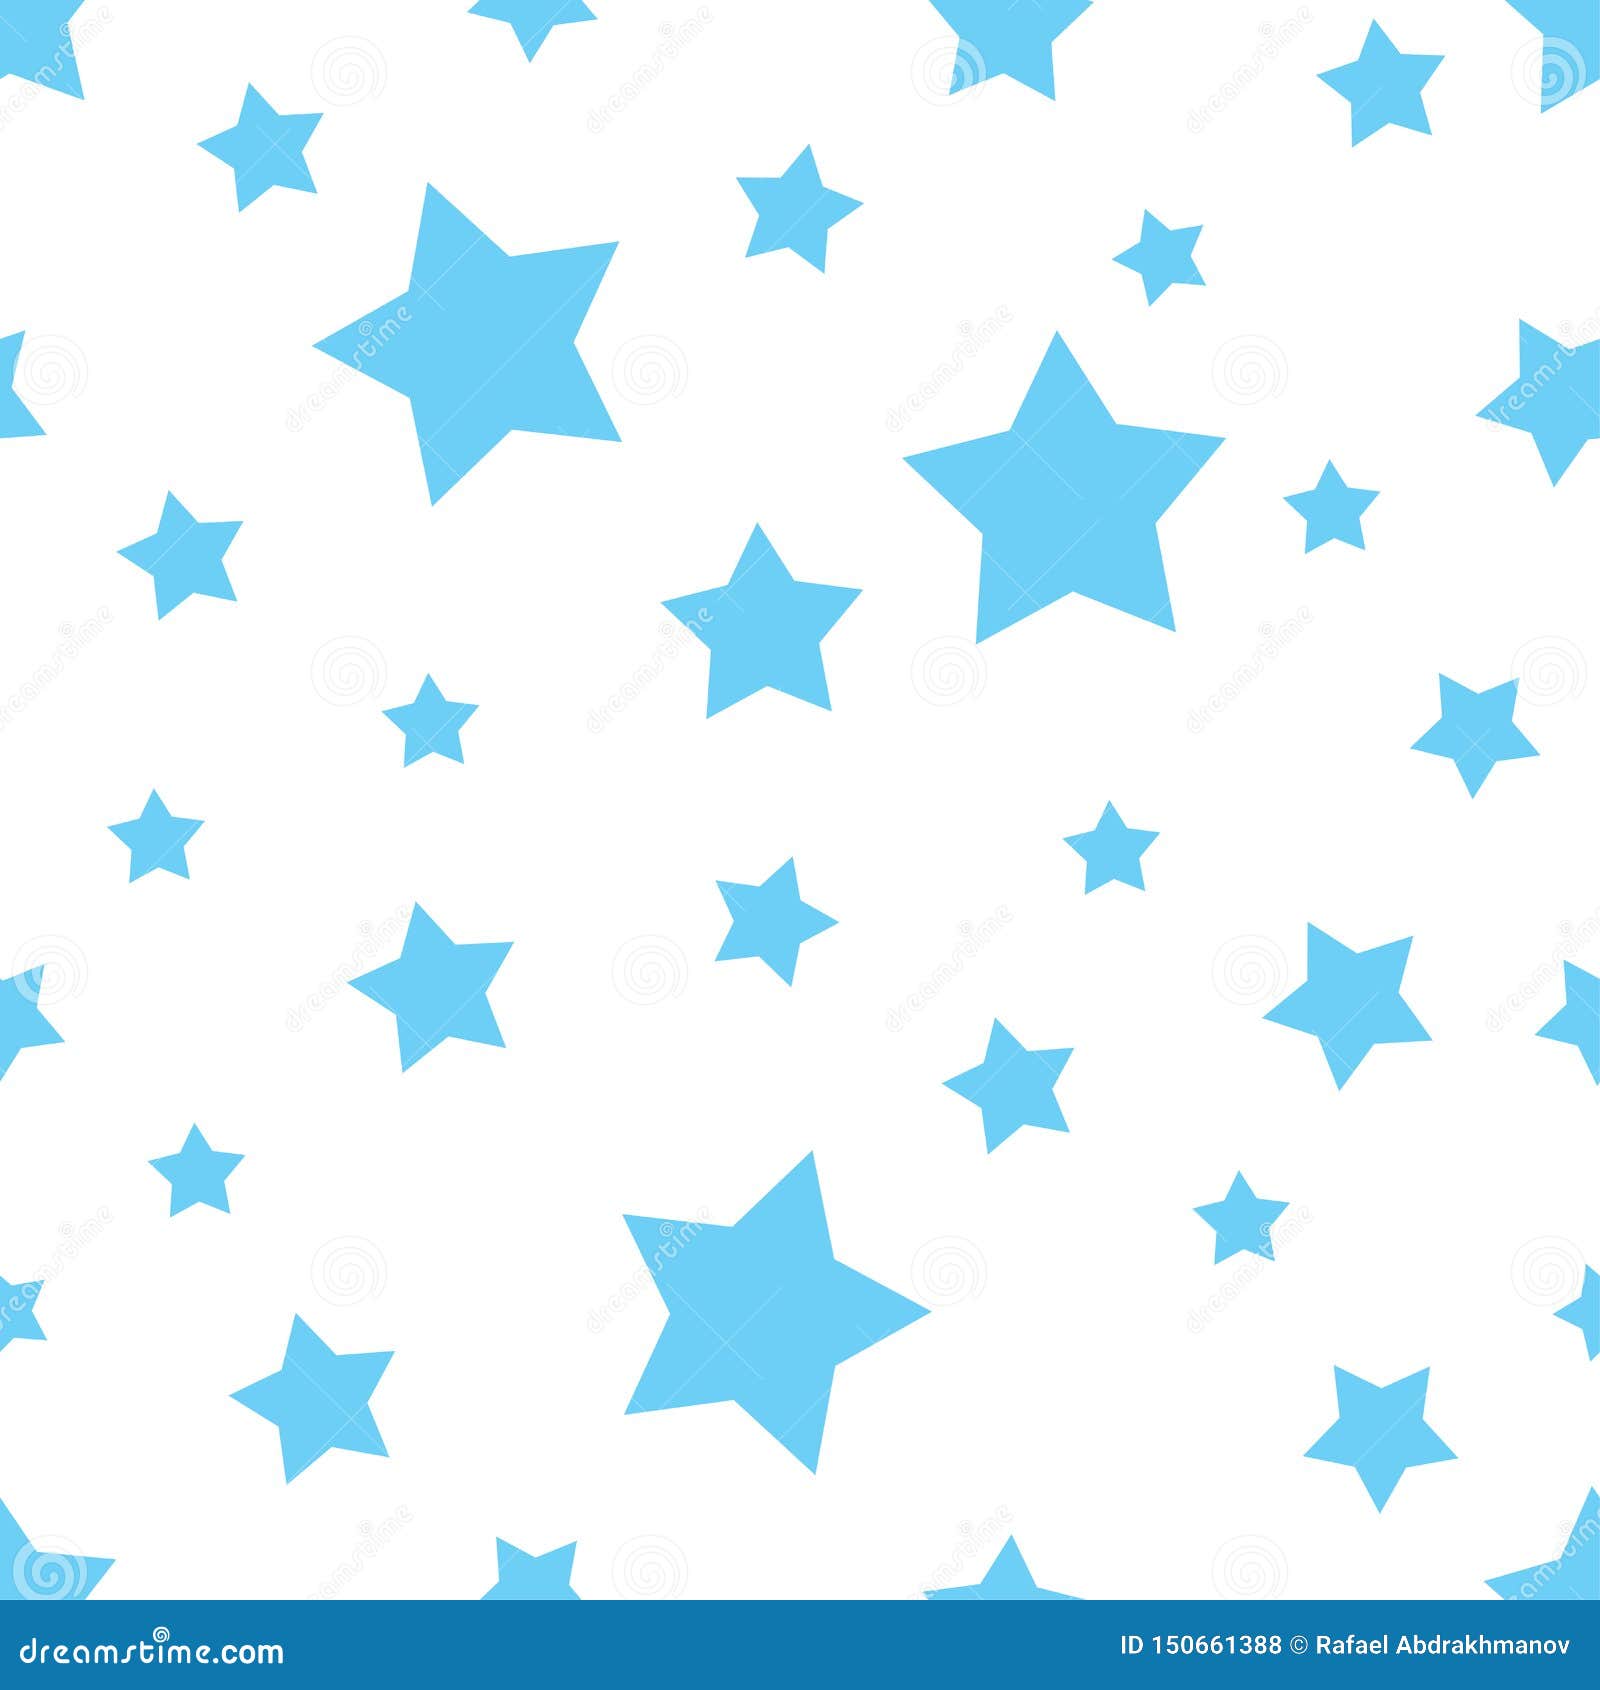 Seamless Blue Star Shape Pattern. Texture To Print on Cover Paper or Fabric  for the Holiday Memory Day Stock Vector - Illustration of abstract,  background: 150661388